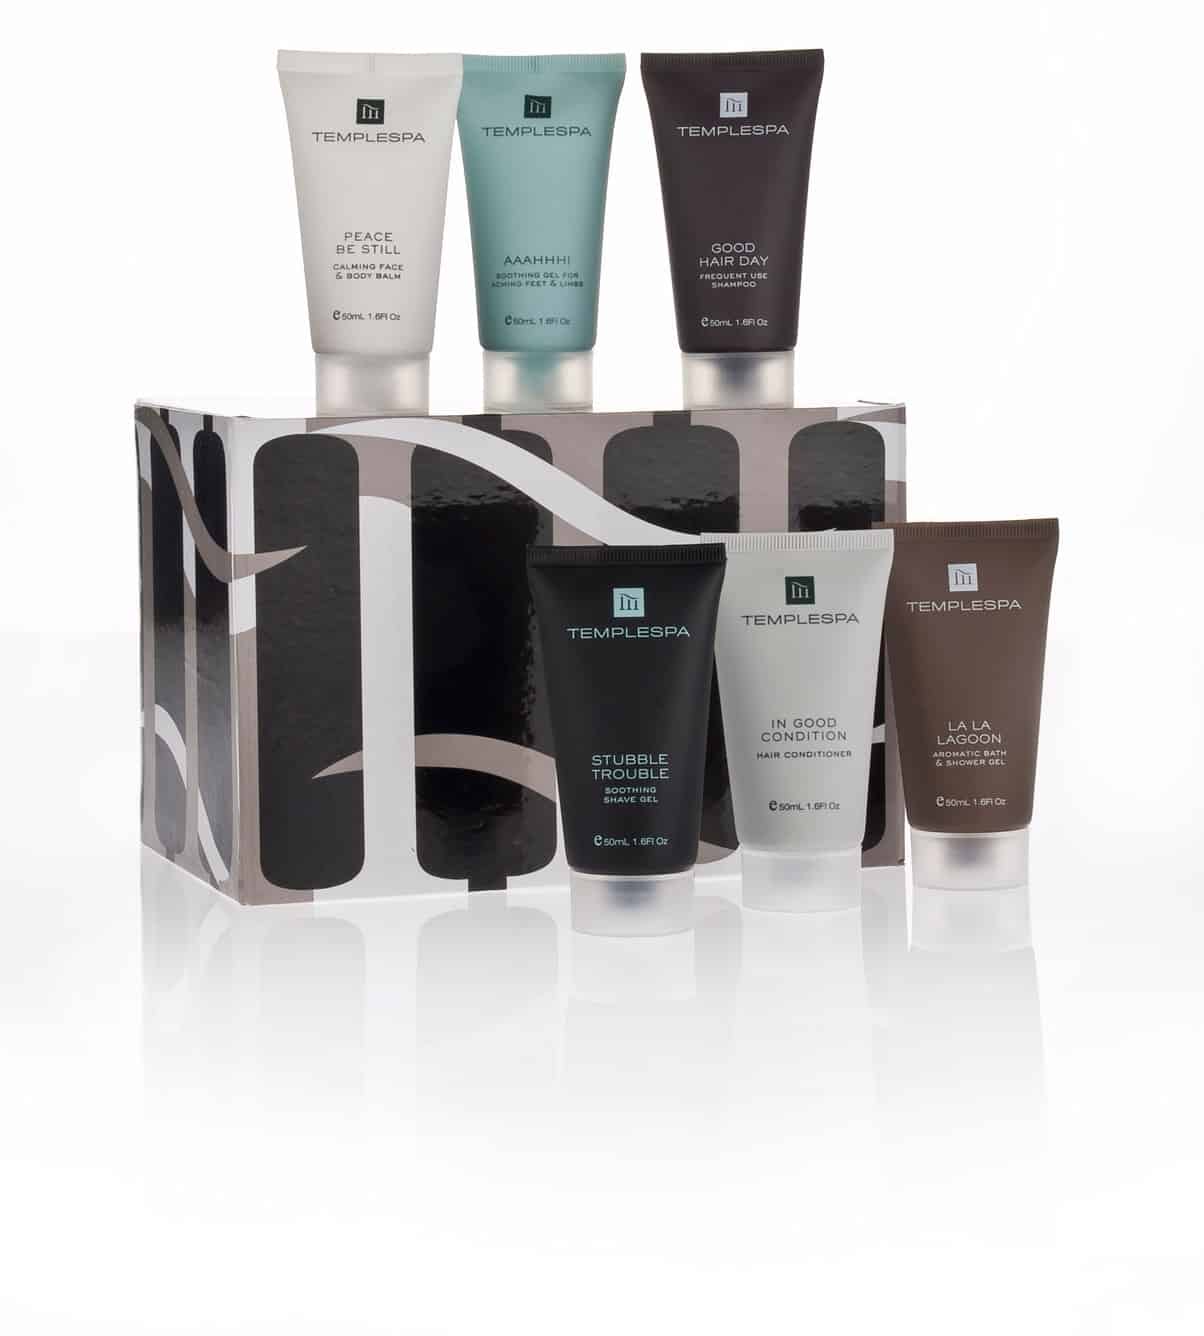 Gift set packaging graphics for Temple Spa's 'The Voyager' product.